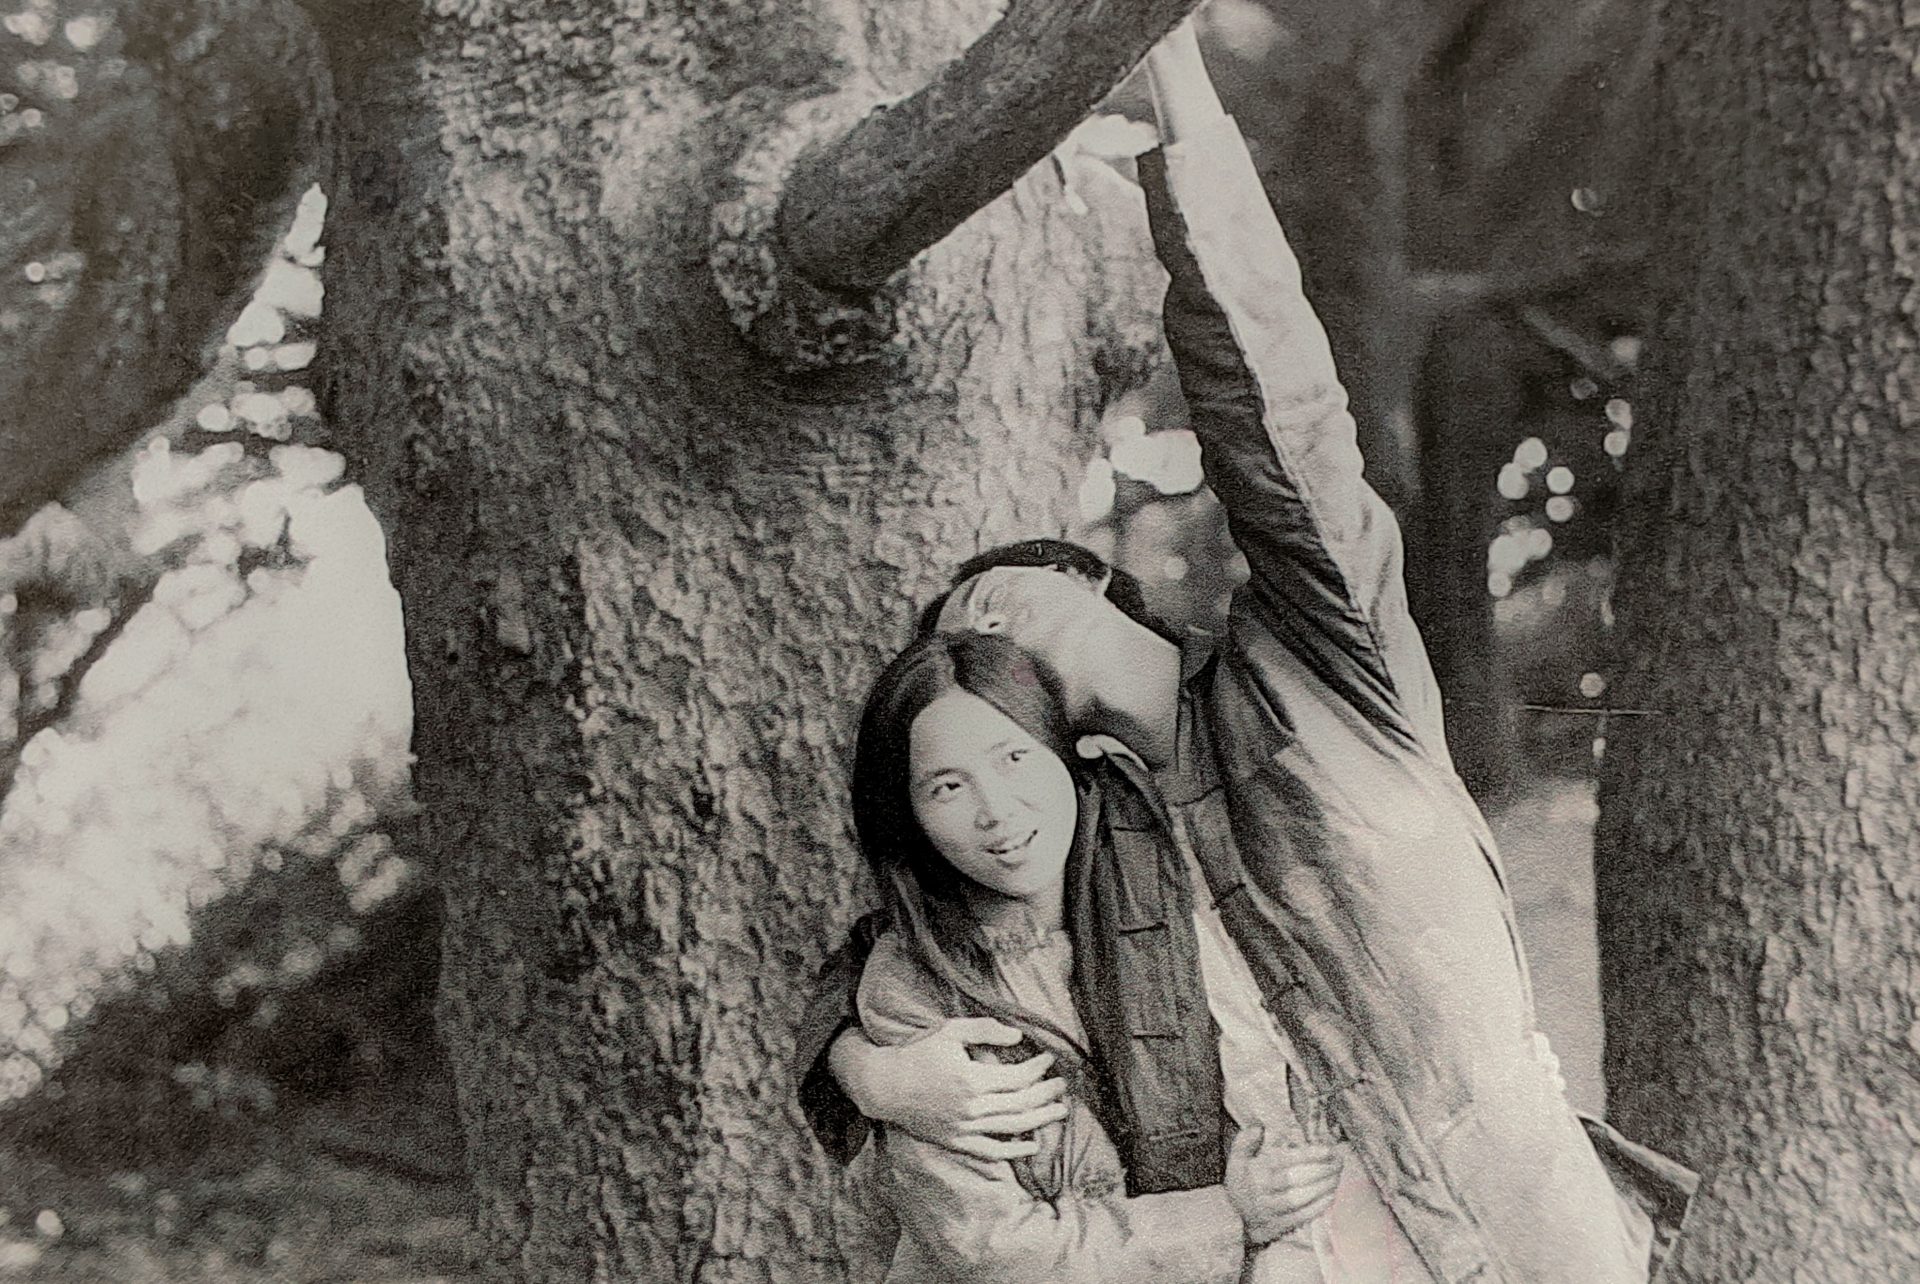 E.F. Wen (left) and Eddie Chang in 1973.